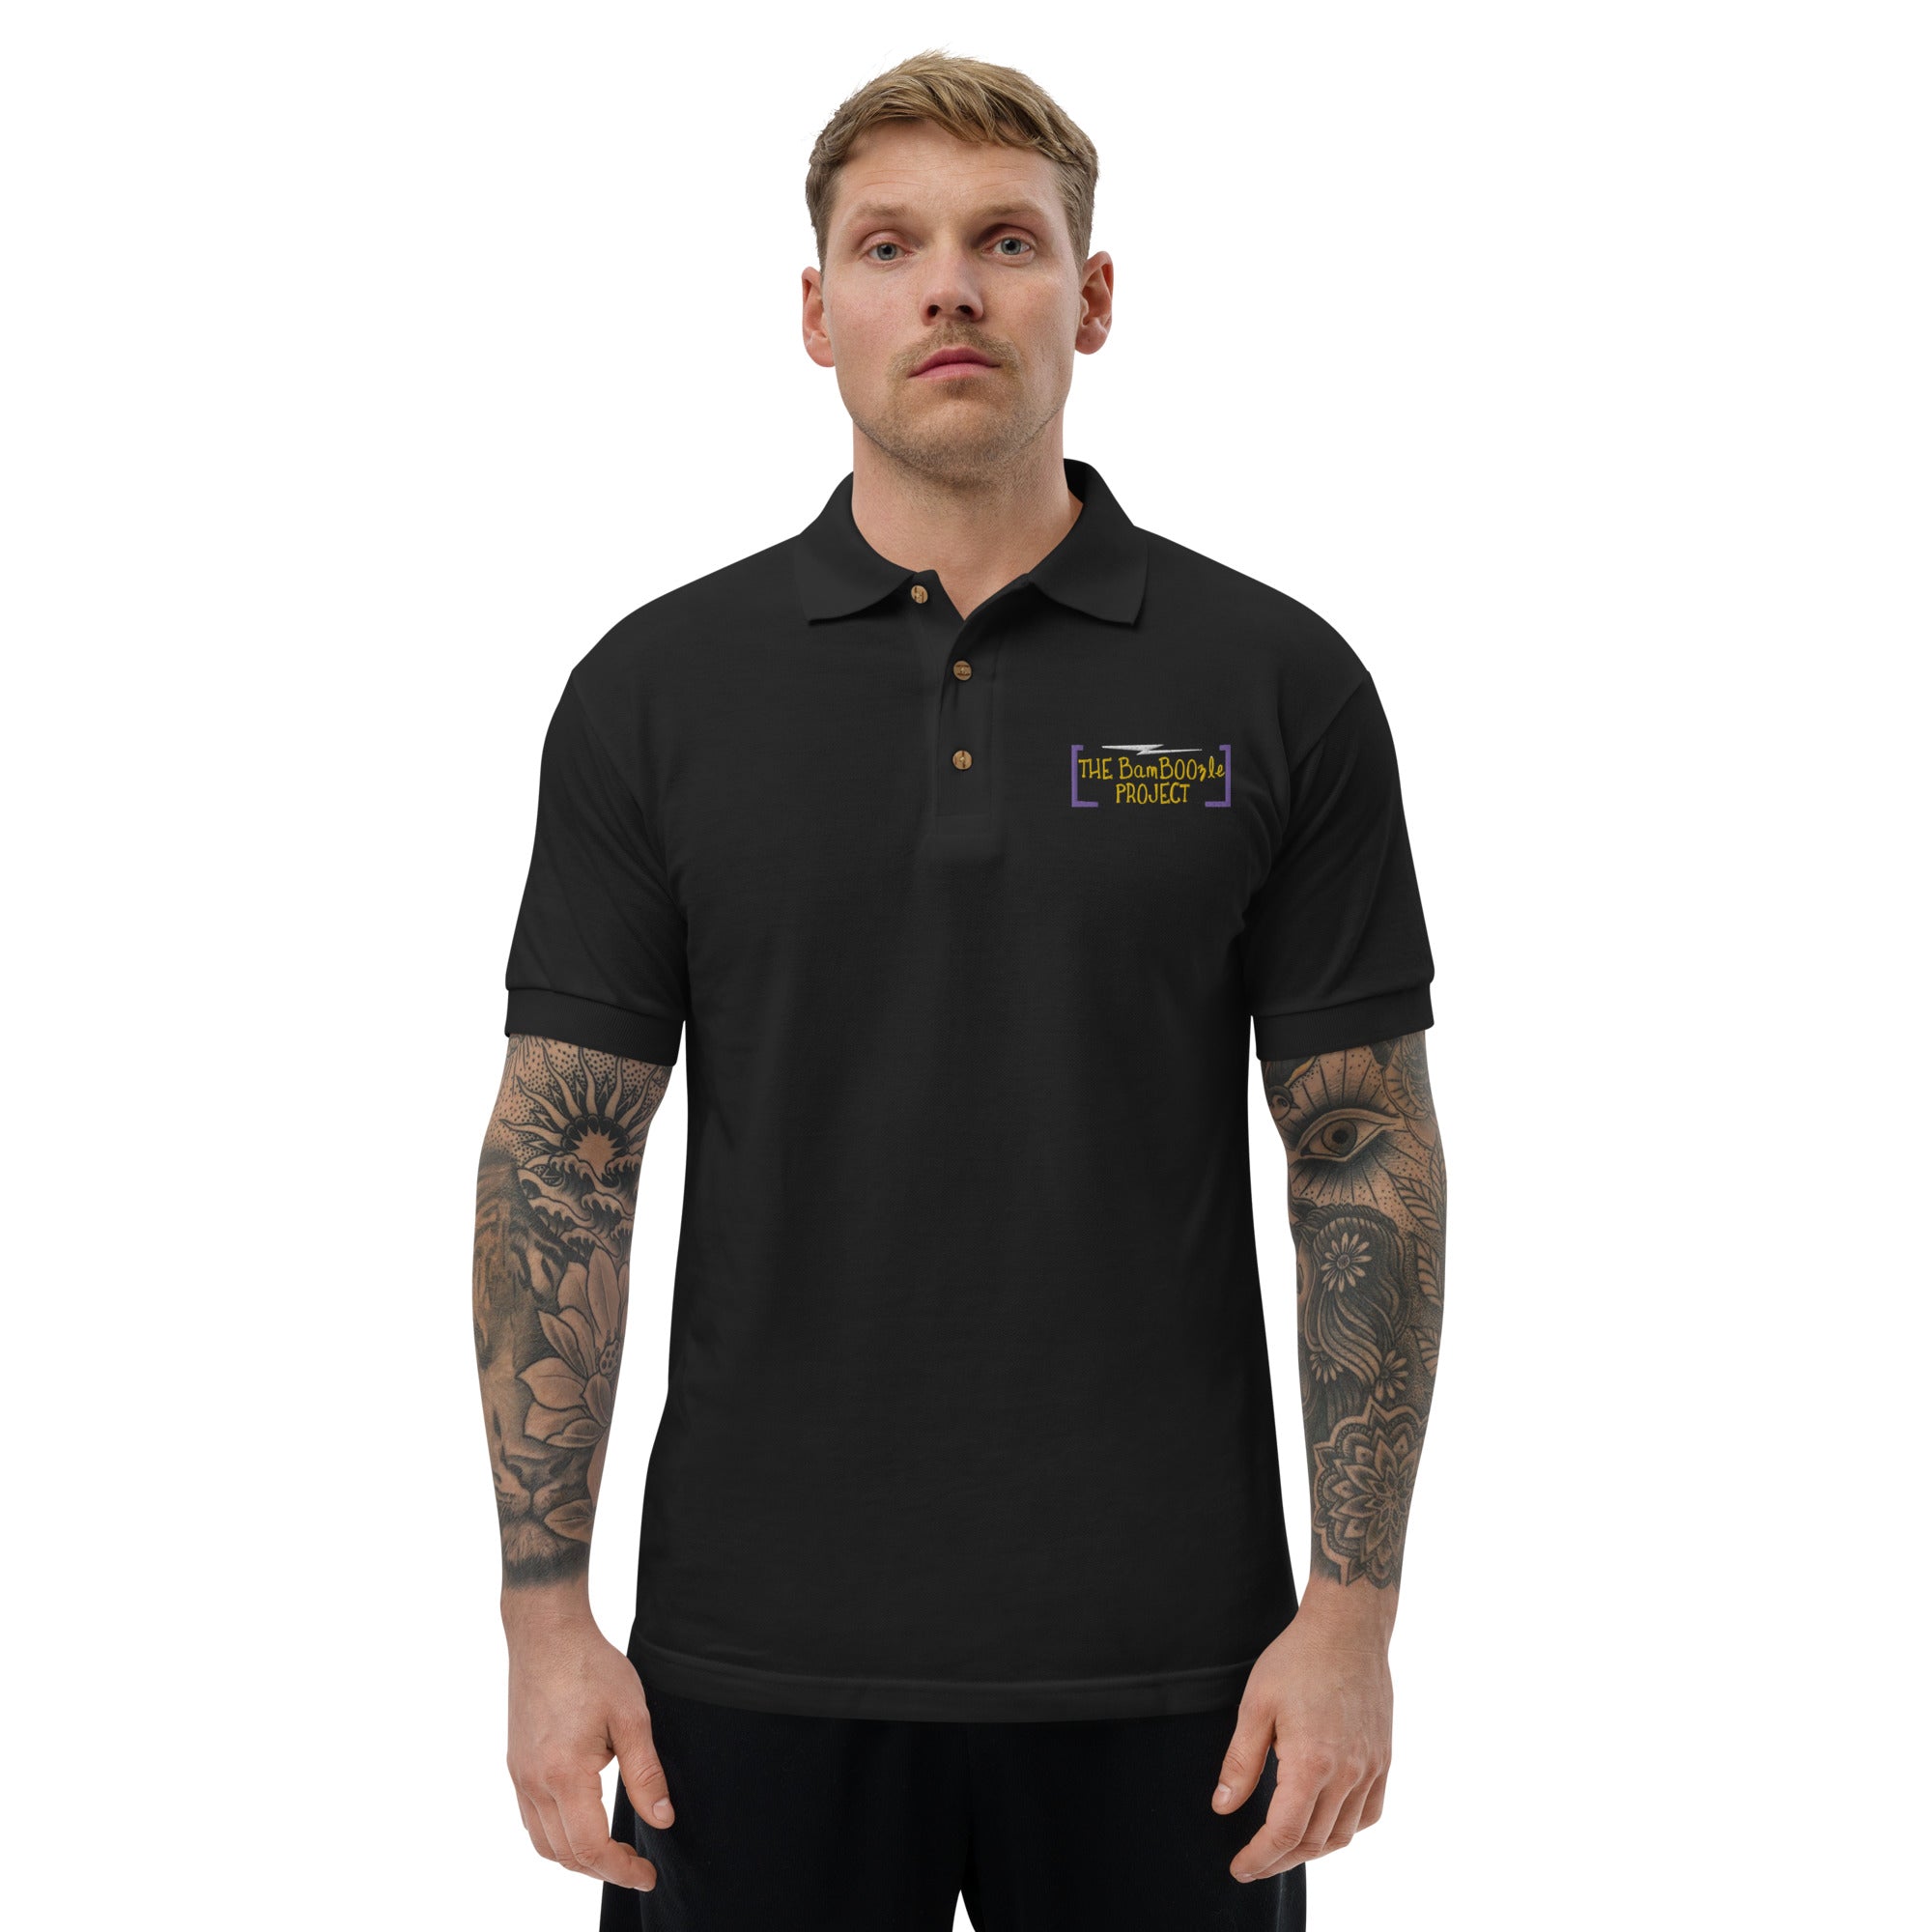 BamBoozle Project Yellow & Purple Embroidered Polo Shirt